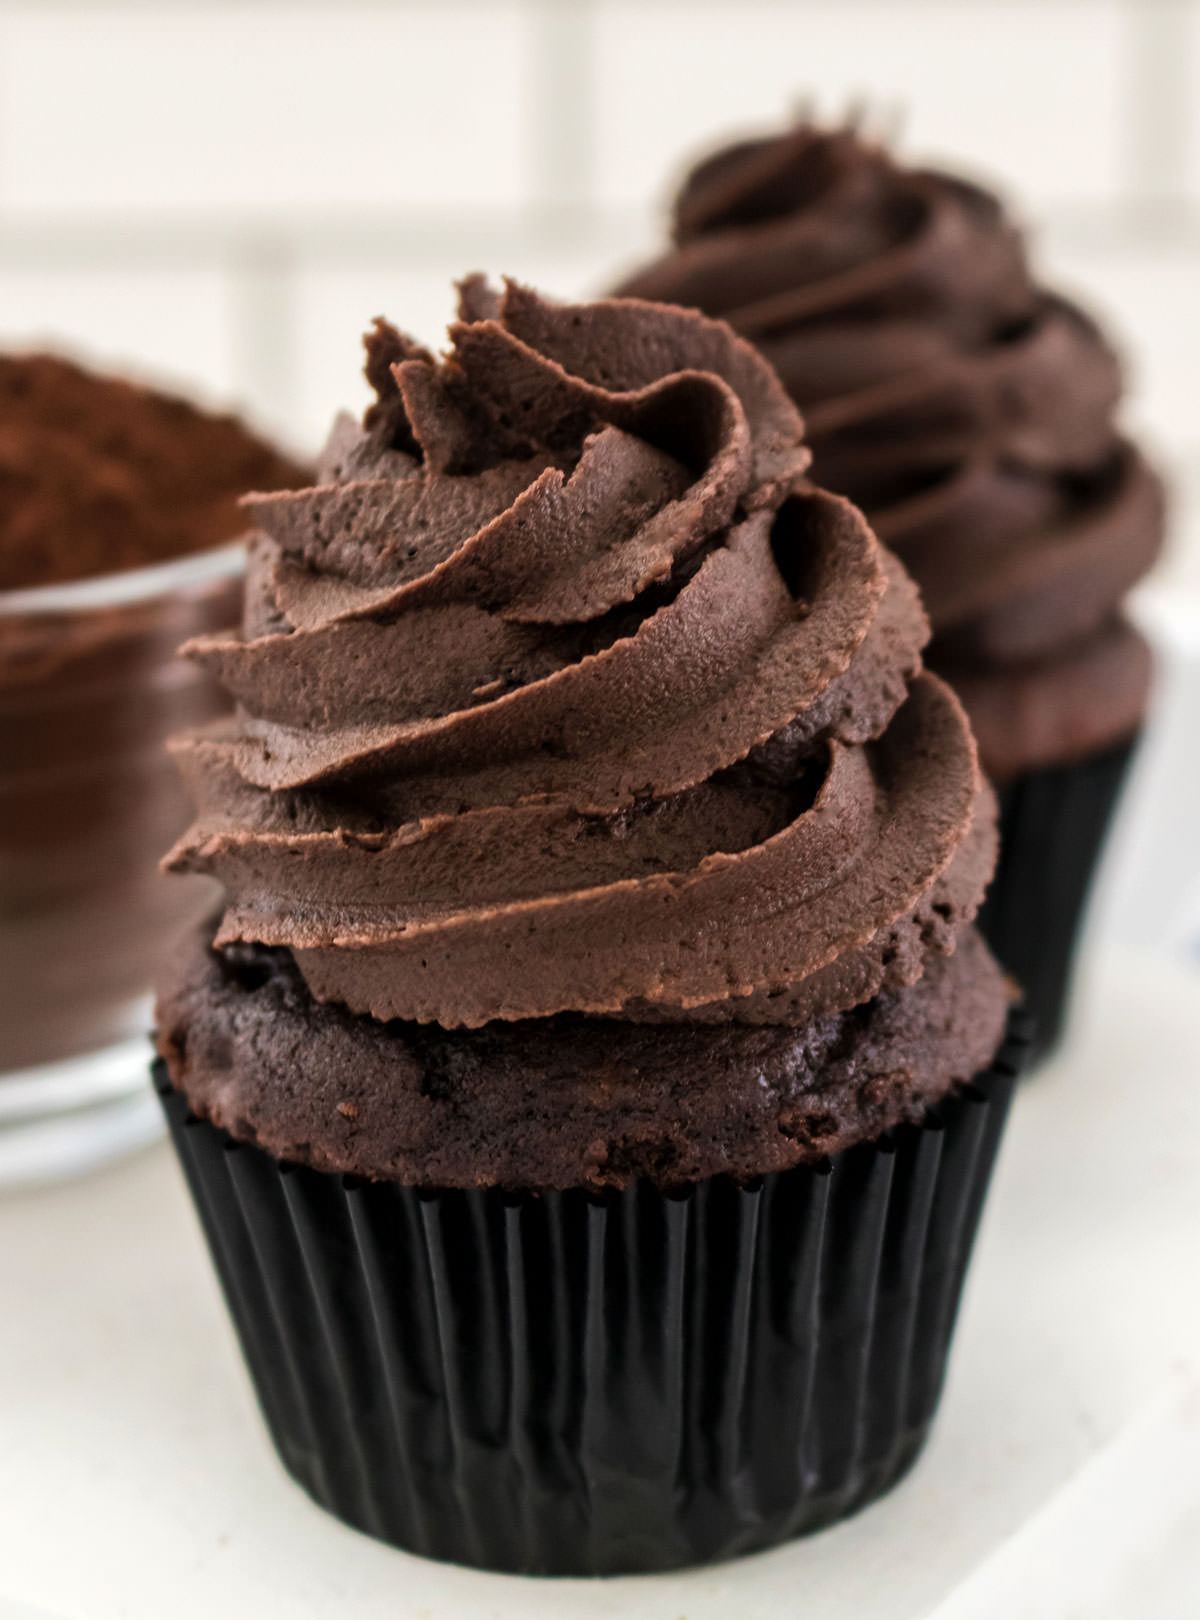 Closeup on a chocolate cupcake topped with The Best Dark Chocolate Buttercream Frosting sitting next to a glass bowl filled with cocoa powder.